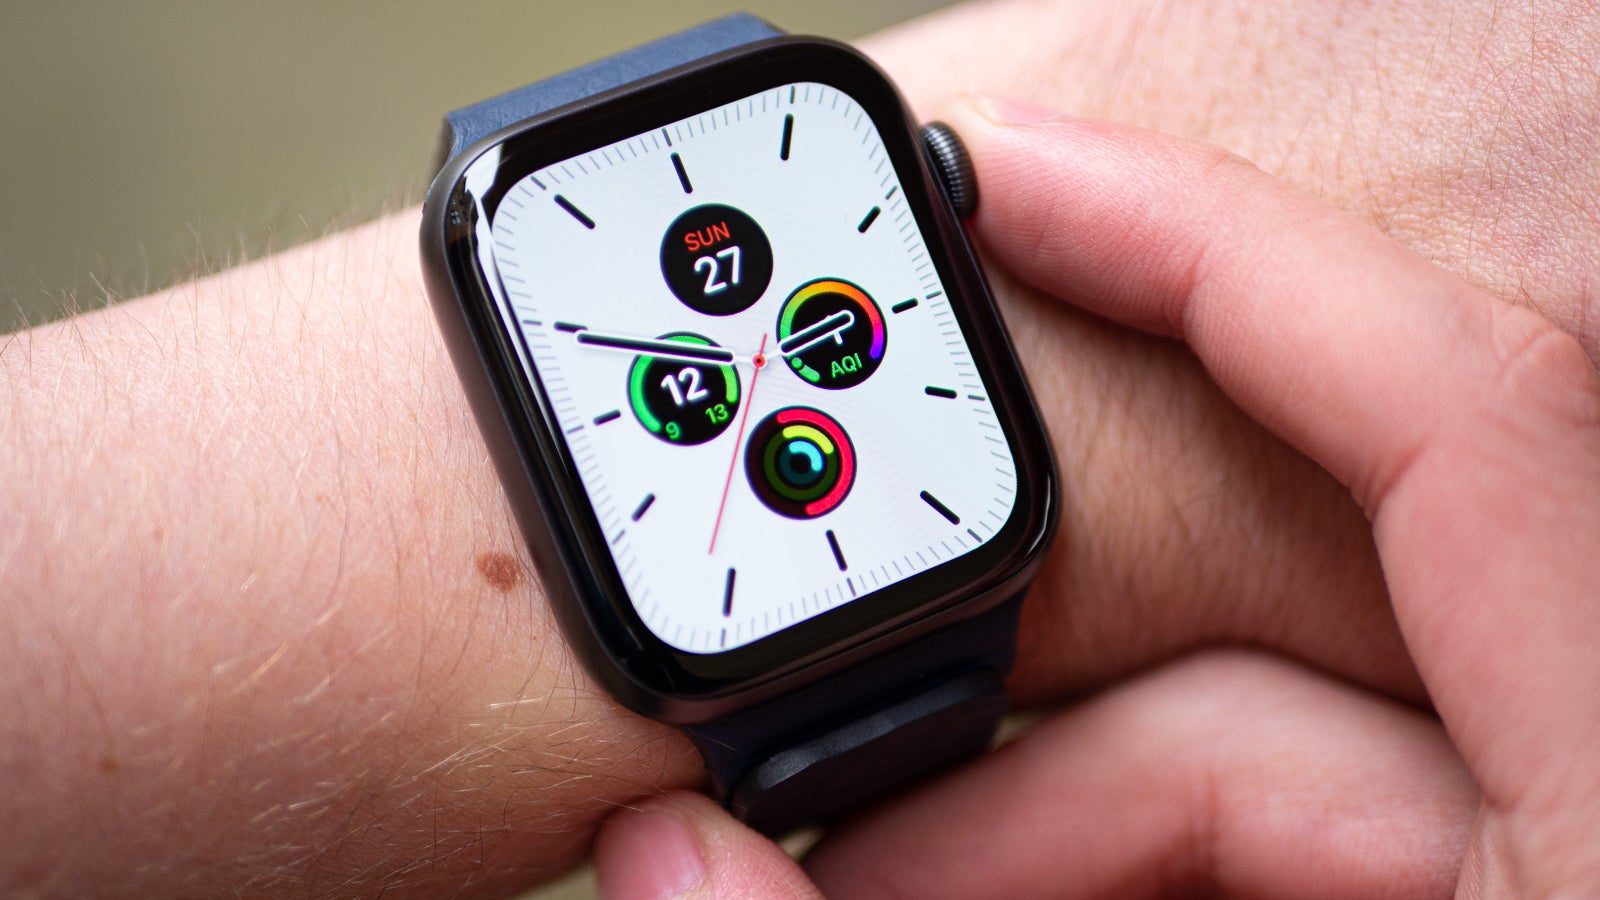 Apple Watch Series 6 Review